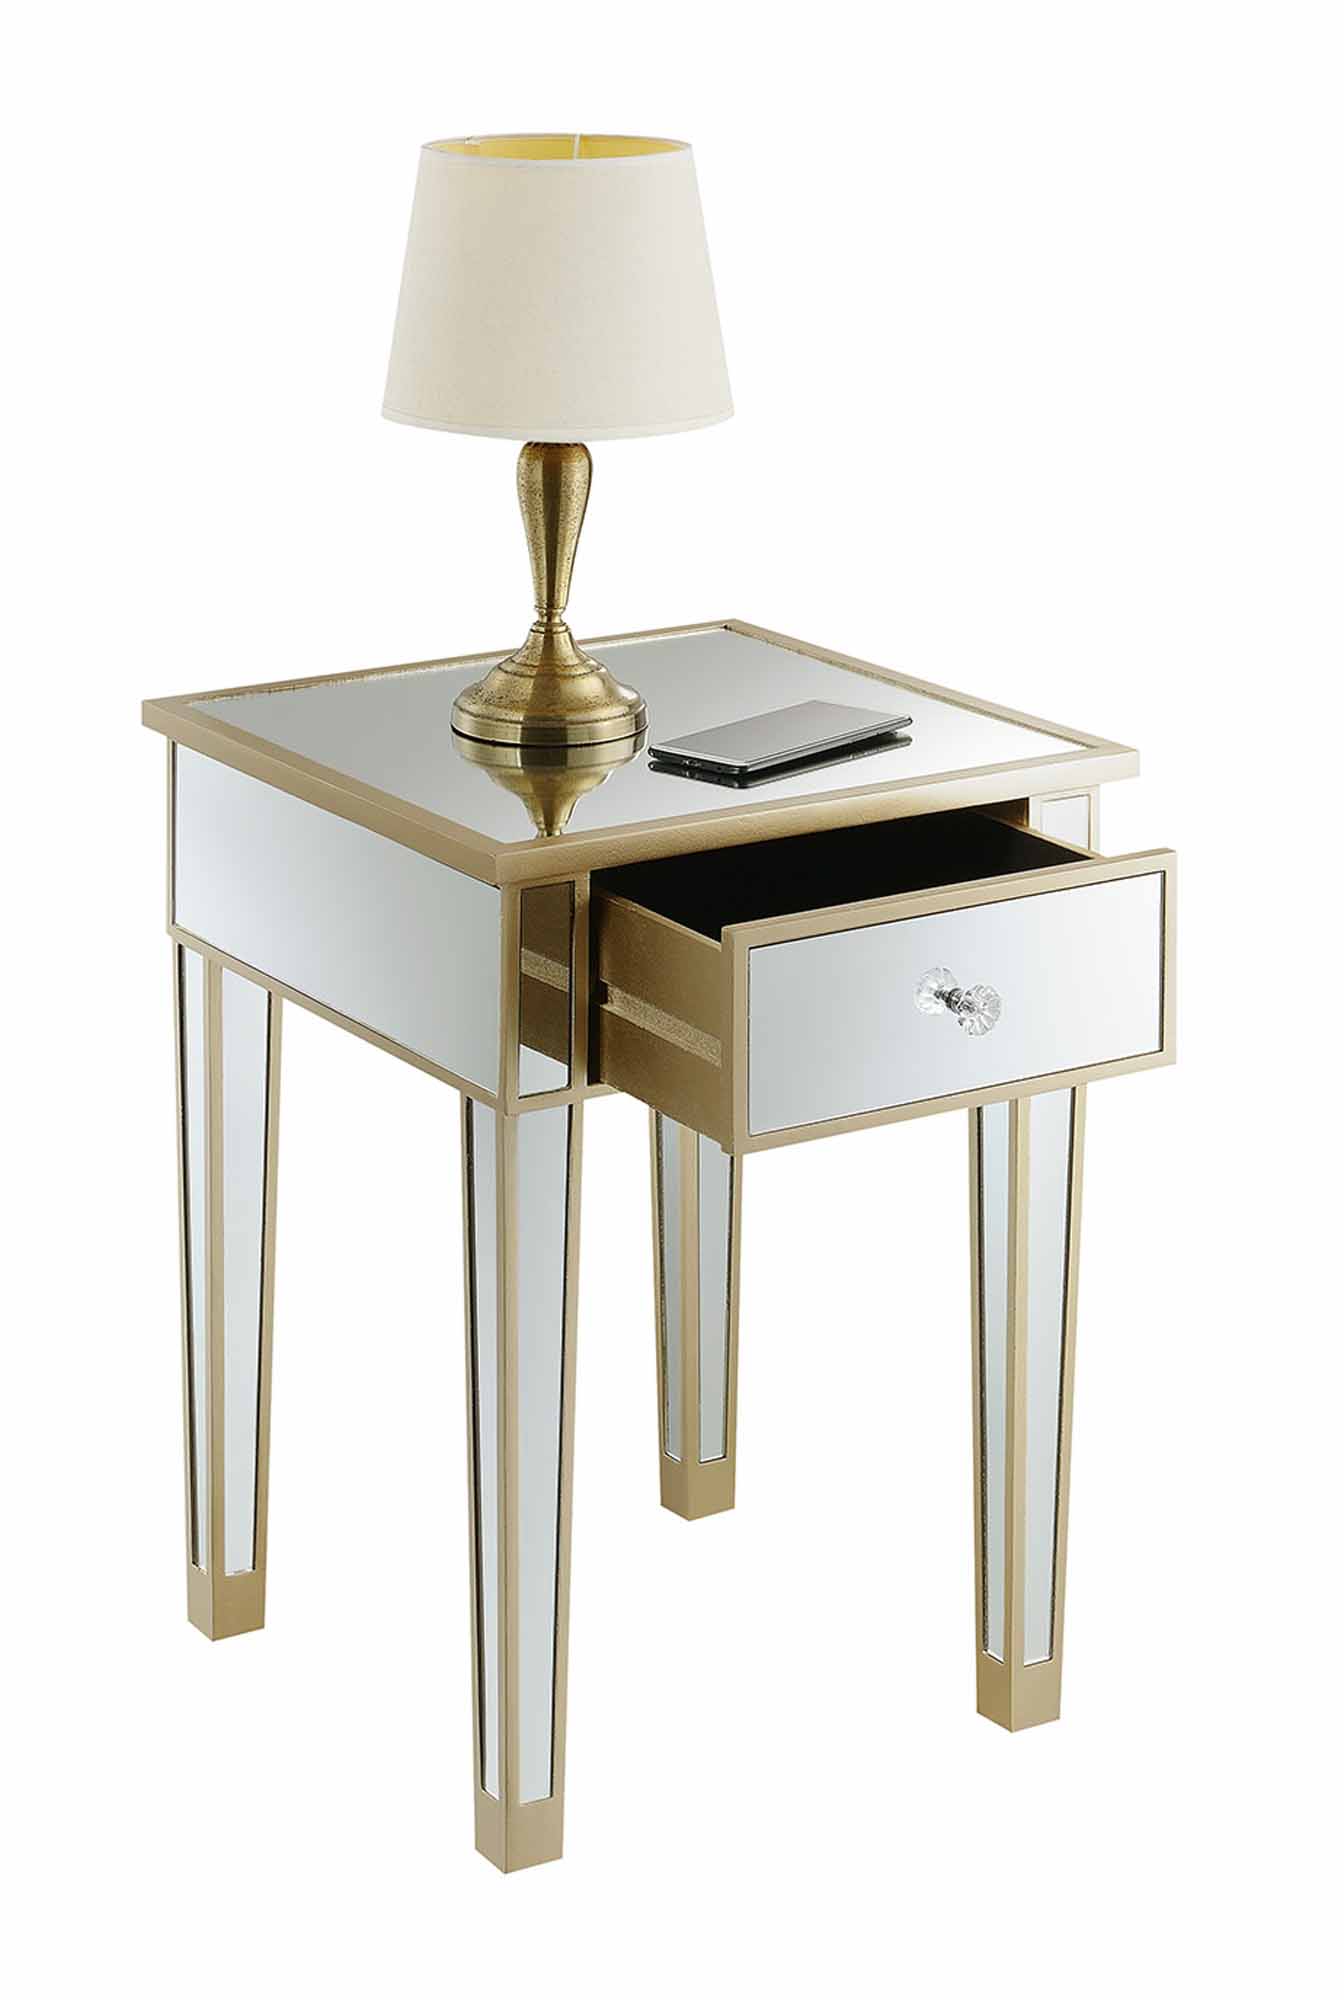 Convenience Concepts Gold Coast Mirrored End Table with Drawer, Multiple Colors - image 2 of 3